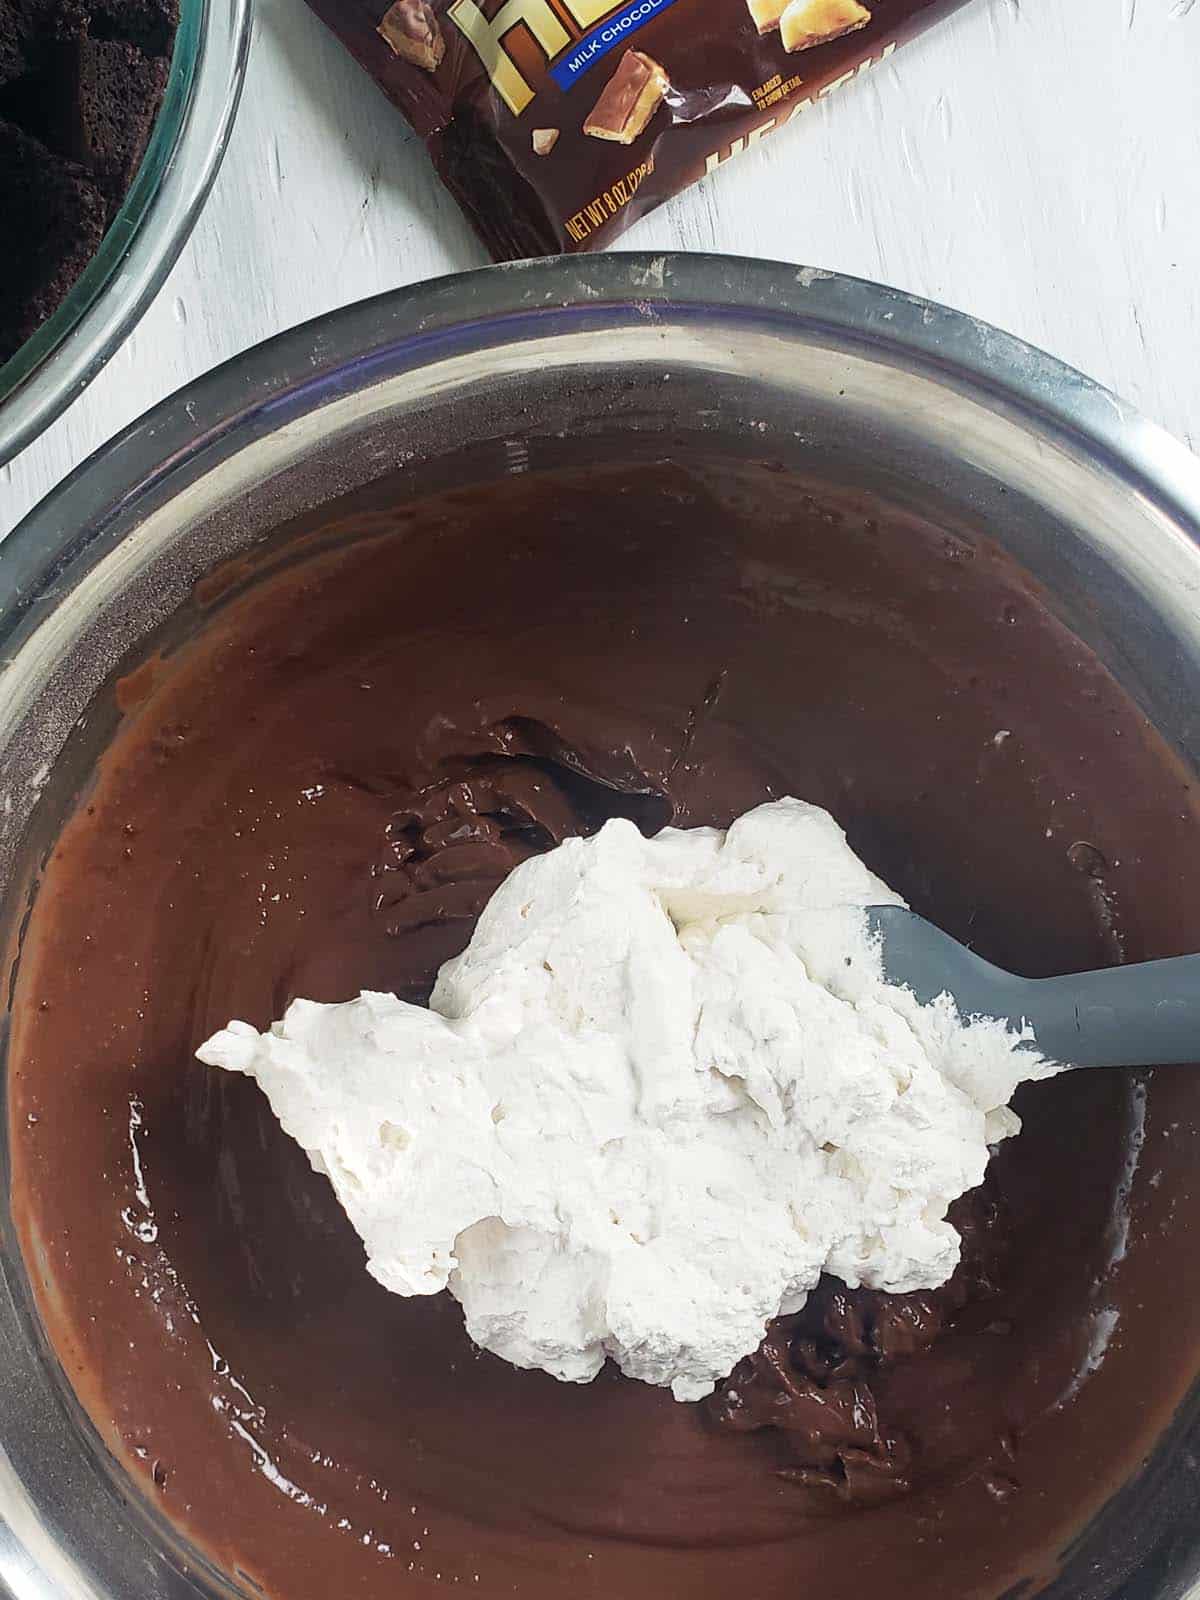 Whipped cream on top of chocolate pudding in a metal bowl.